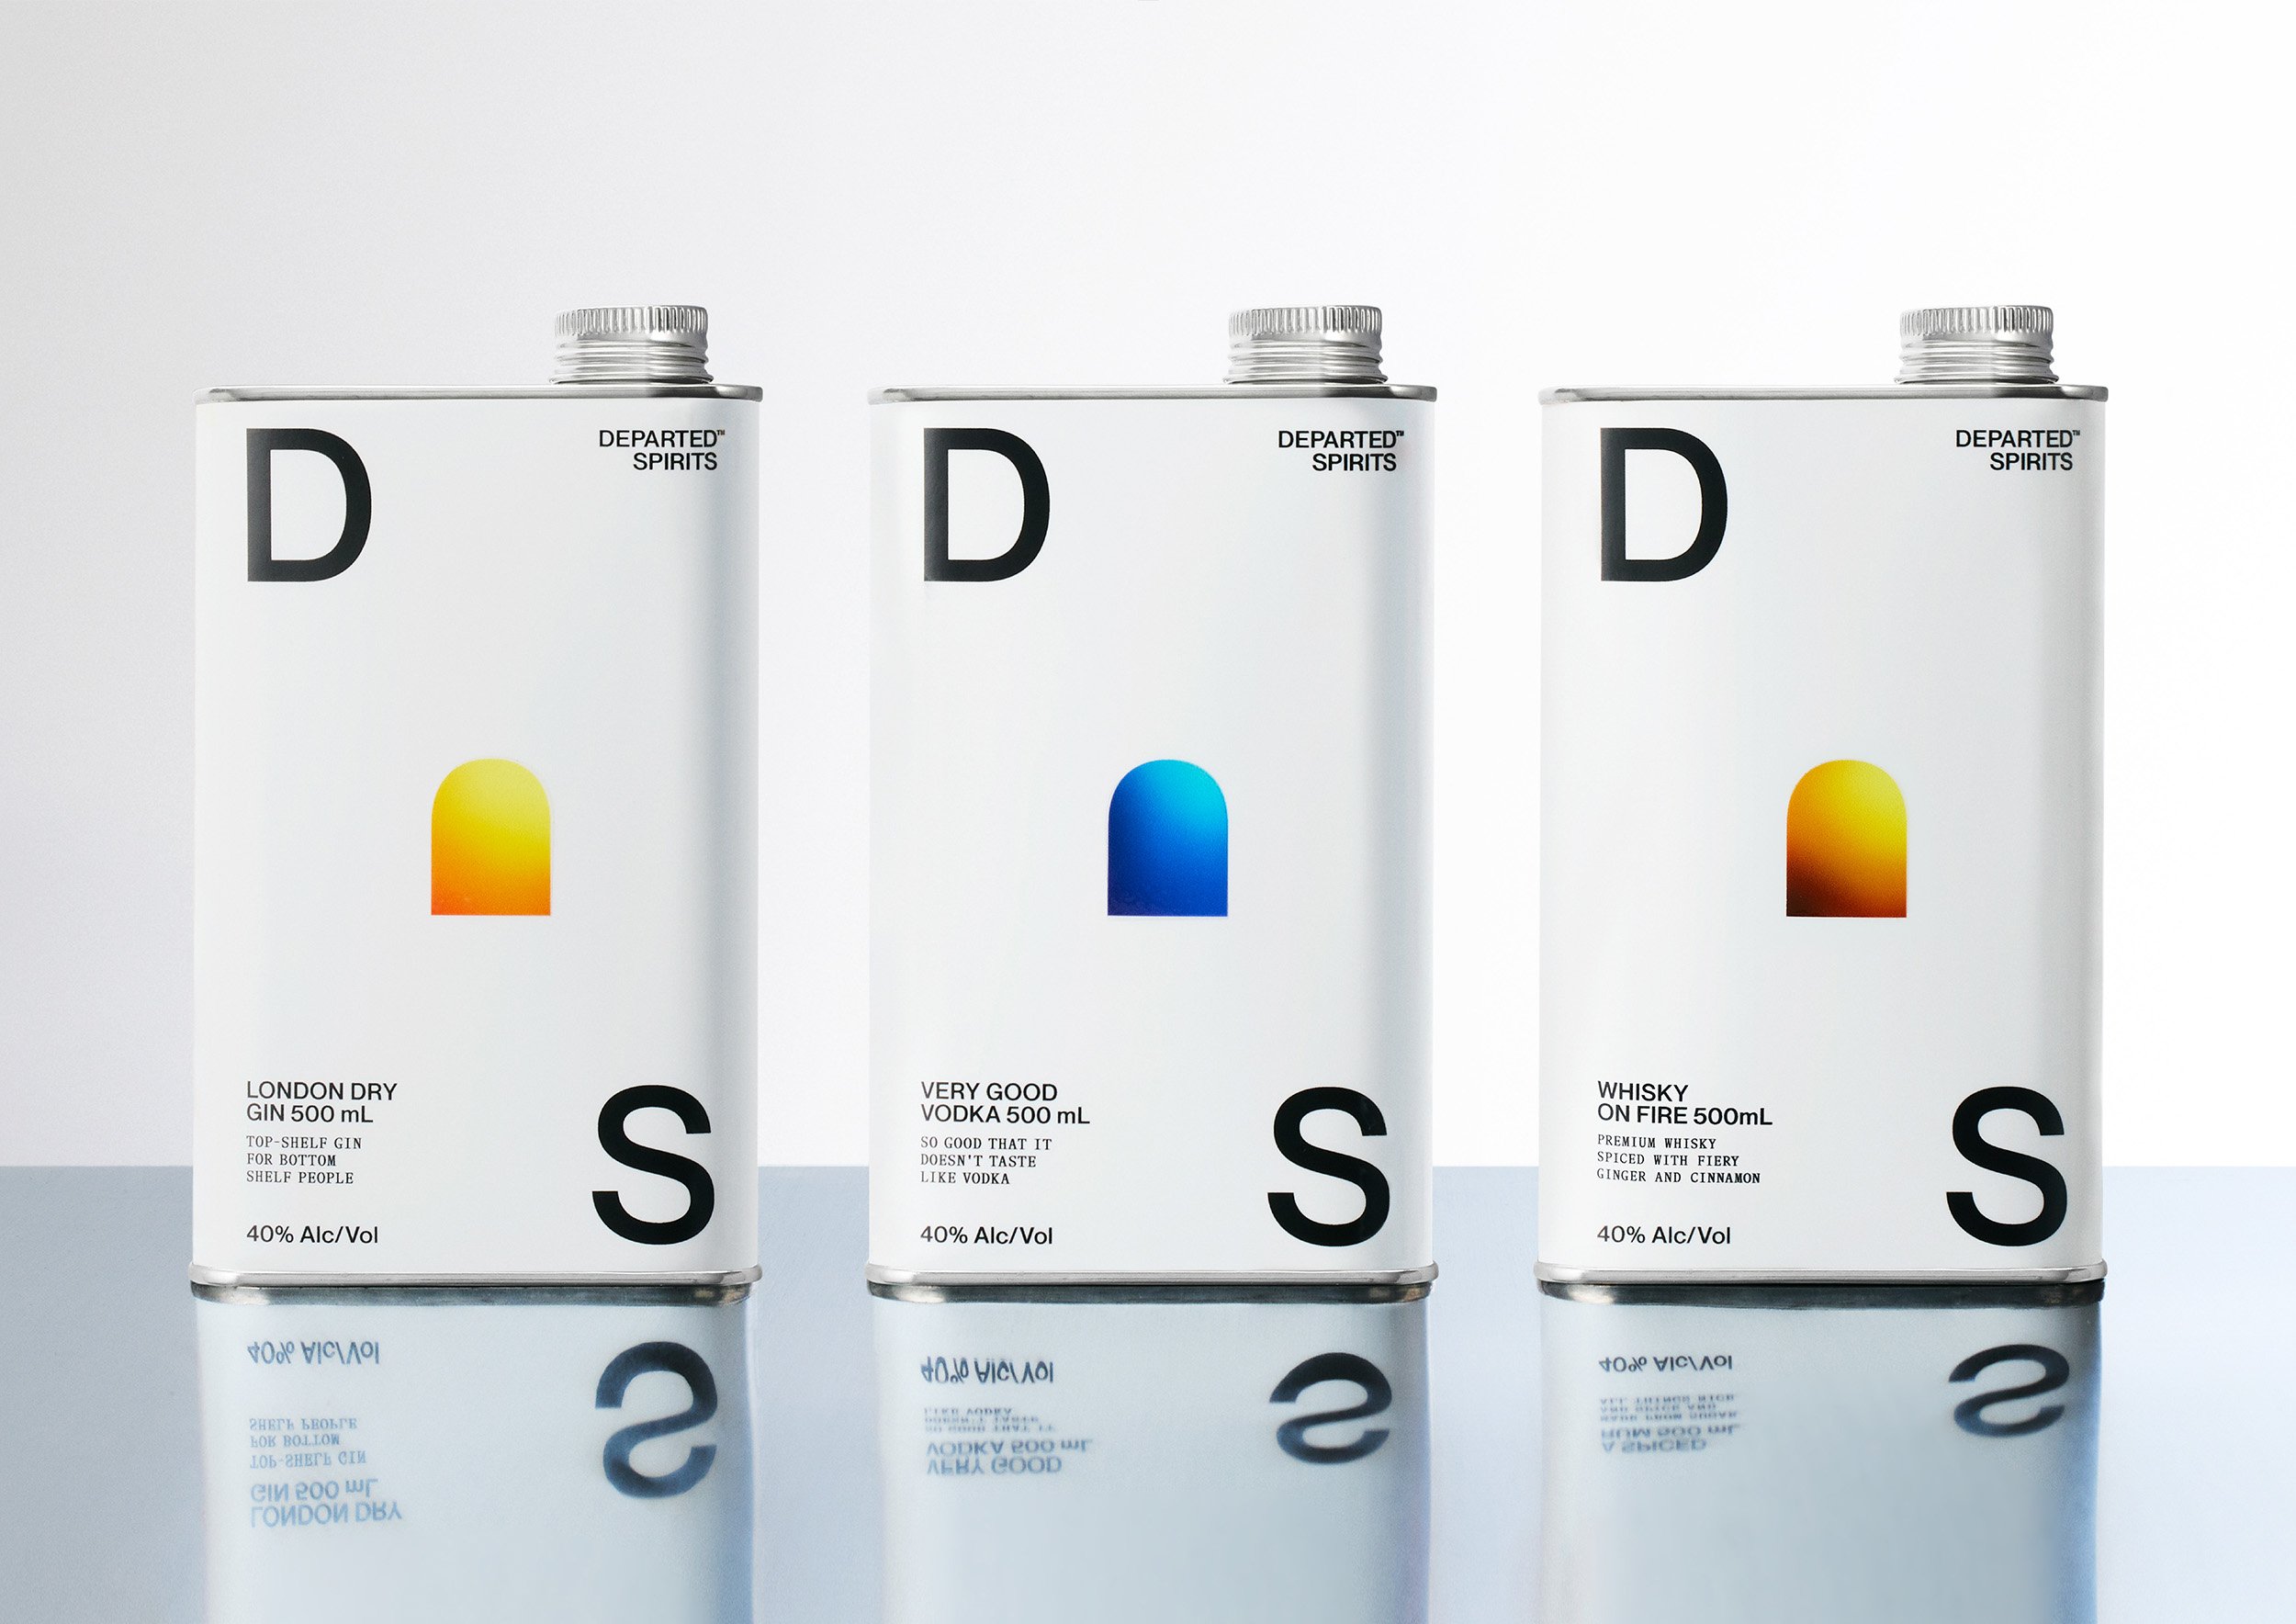 Logotype, packaging, tone of voice and art direction for gin, vodka and whisky brand Departed Spirits by New Zealand-based Marx Design.